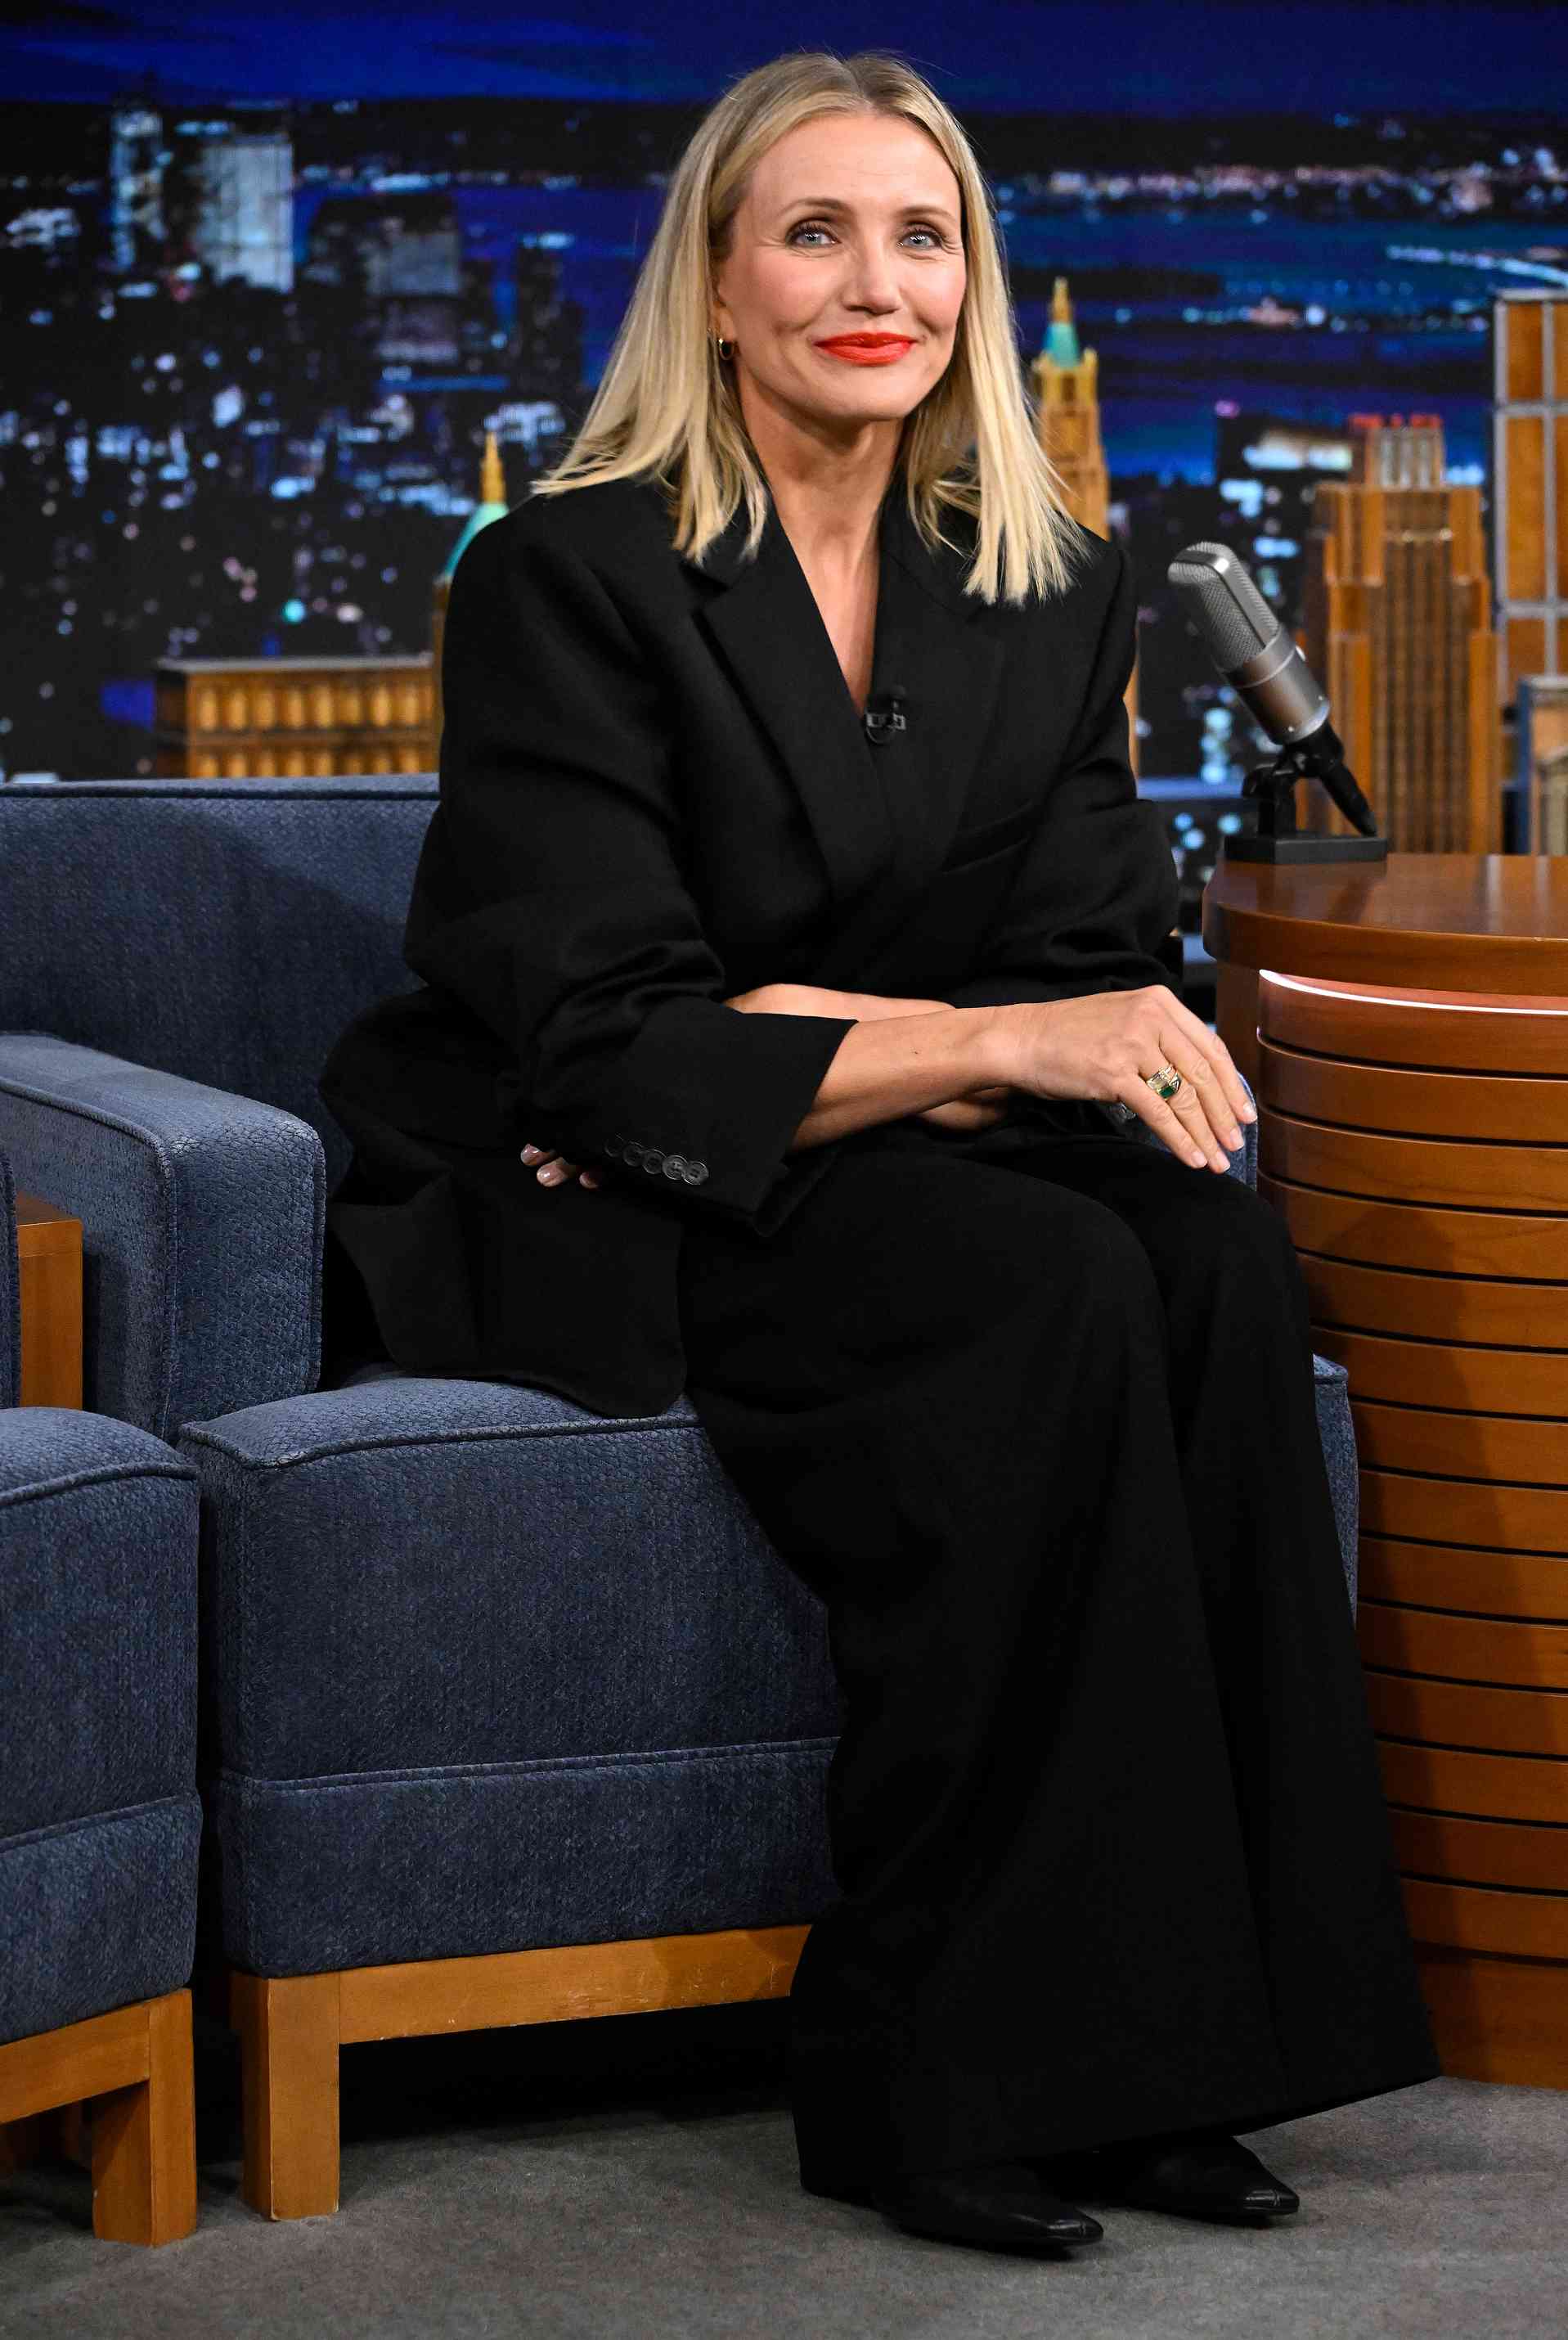 THE TONIGHT SHOW STARRING JIMMY FALLON, Actress Cameron Diaz during an interview on Wednesday, October 25, 2023